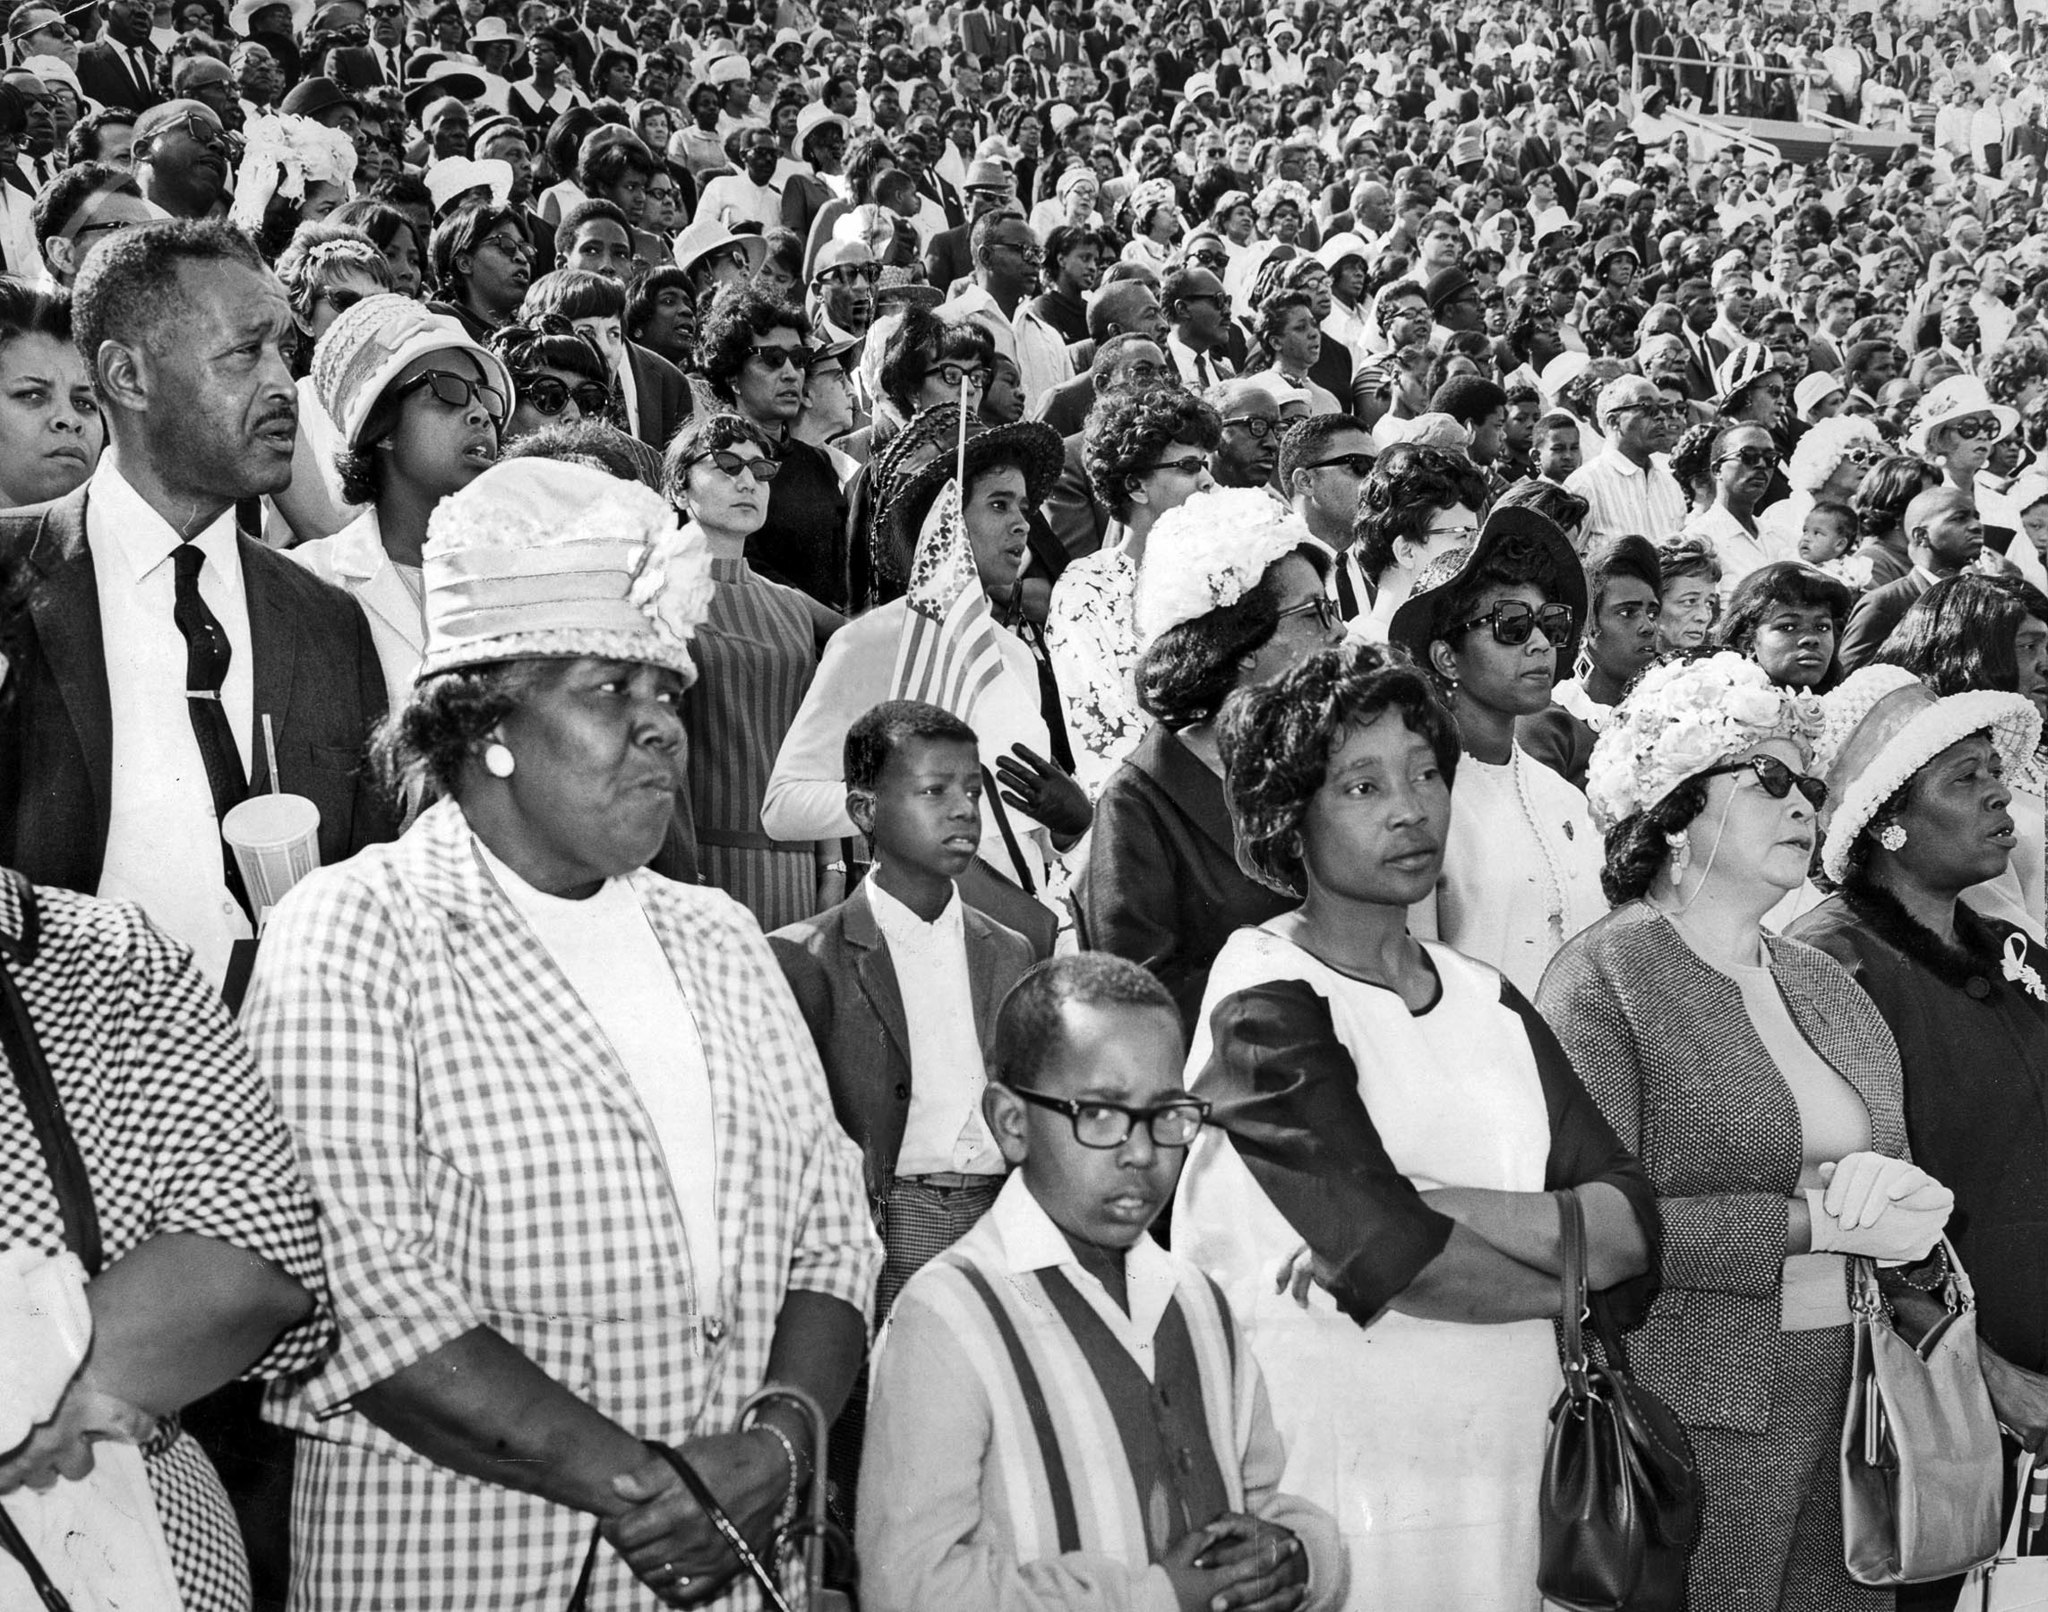 Apr. 7, 1968: A crowd of over 20,000 attends memorial at the Coliseum for Dr. Martin Luther King fol